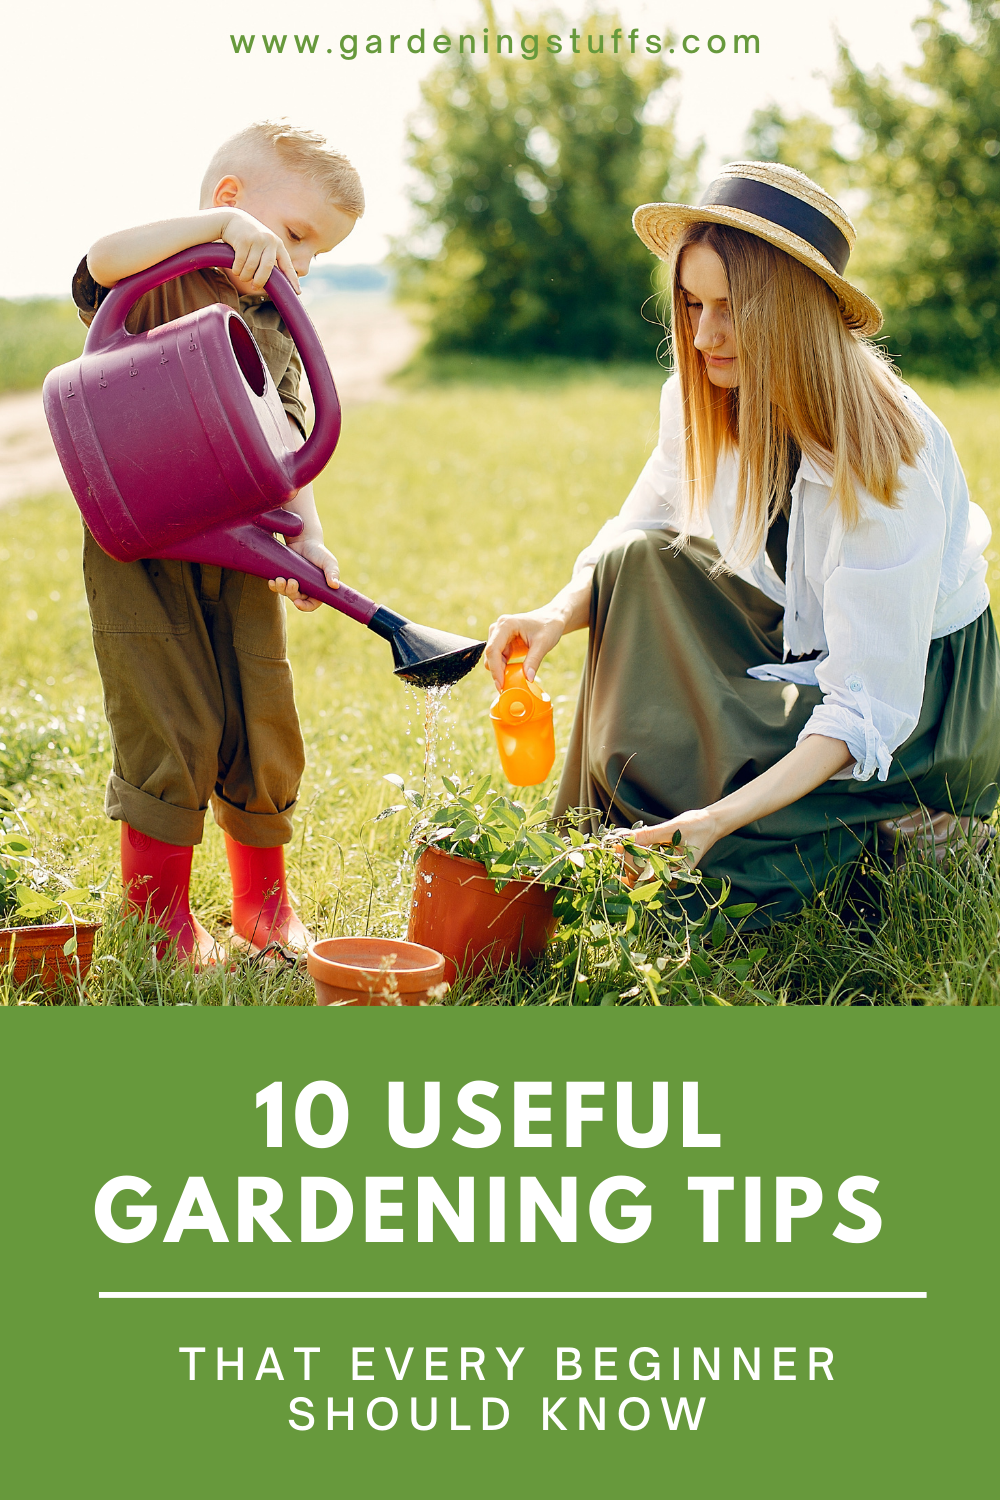 How to get started with gardening for yourself if you don’t know much about it in the first place? Read on and discover 10 useful gardening tips for beginners like yourself, and see if you won’t begin to develop a green thumb soon after.